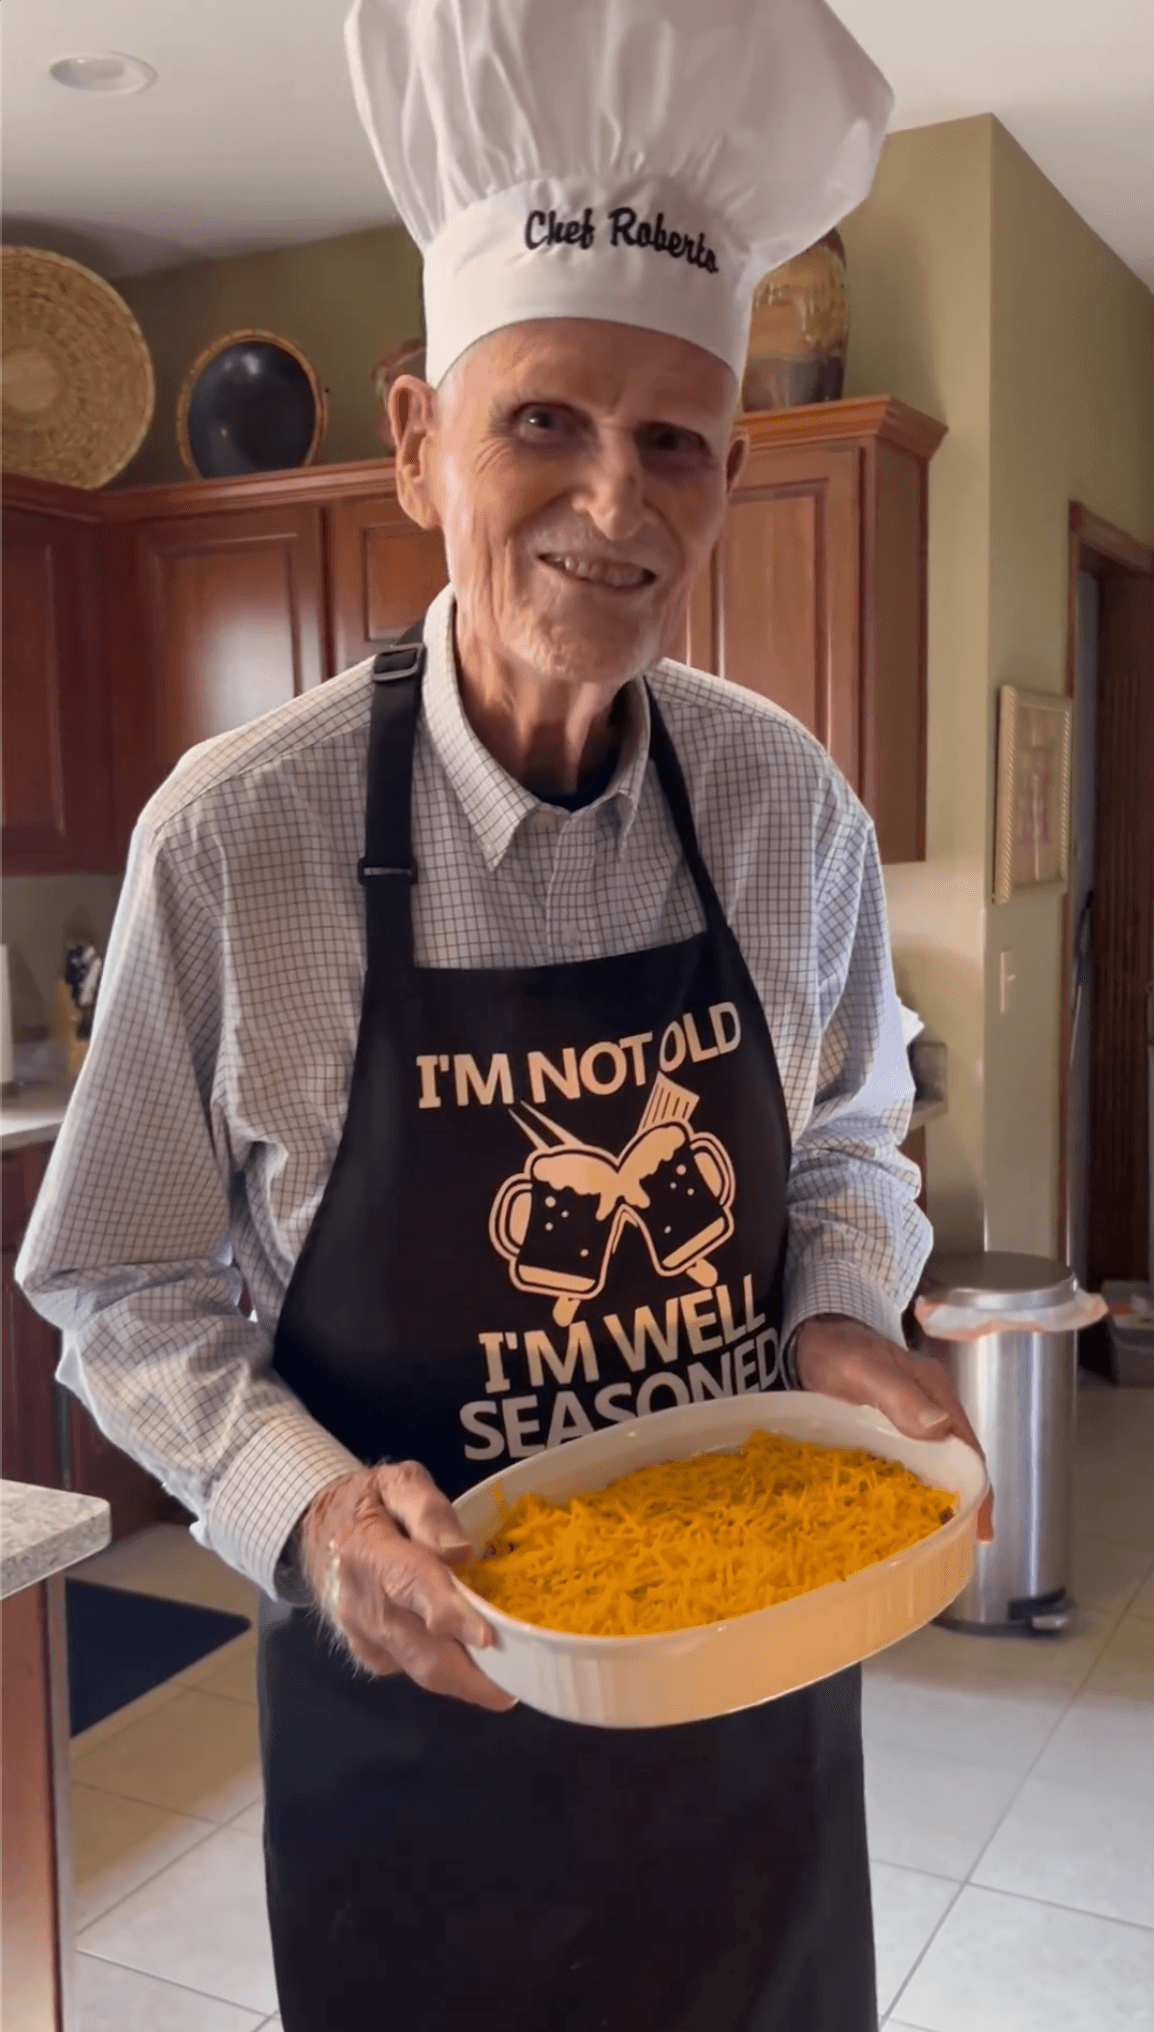 At age 92, Pop has become Instagram famous for his engaging videos. (Courtesy of <a href="https://www.instagram.com/popshappybreakfast/">@popshappybreakfast</a>)